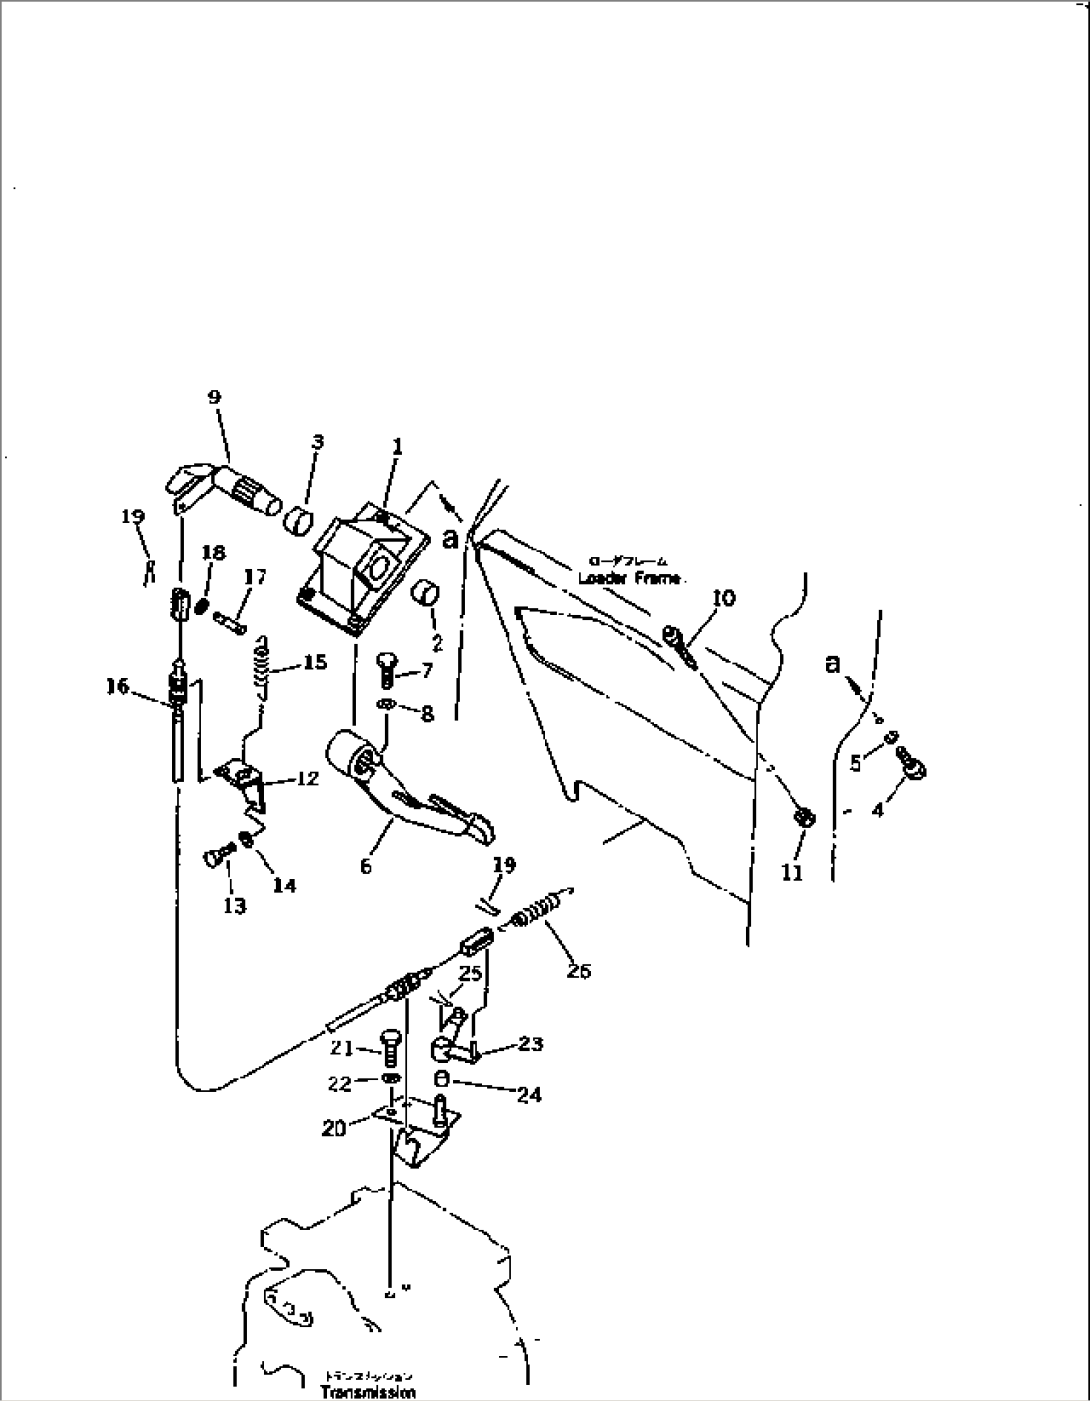 INCHING PEDAL (FOR PEDAL STEERING) (NOISE SUPPRESSION FOR EC)(#60280-)